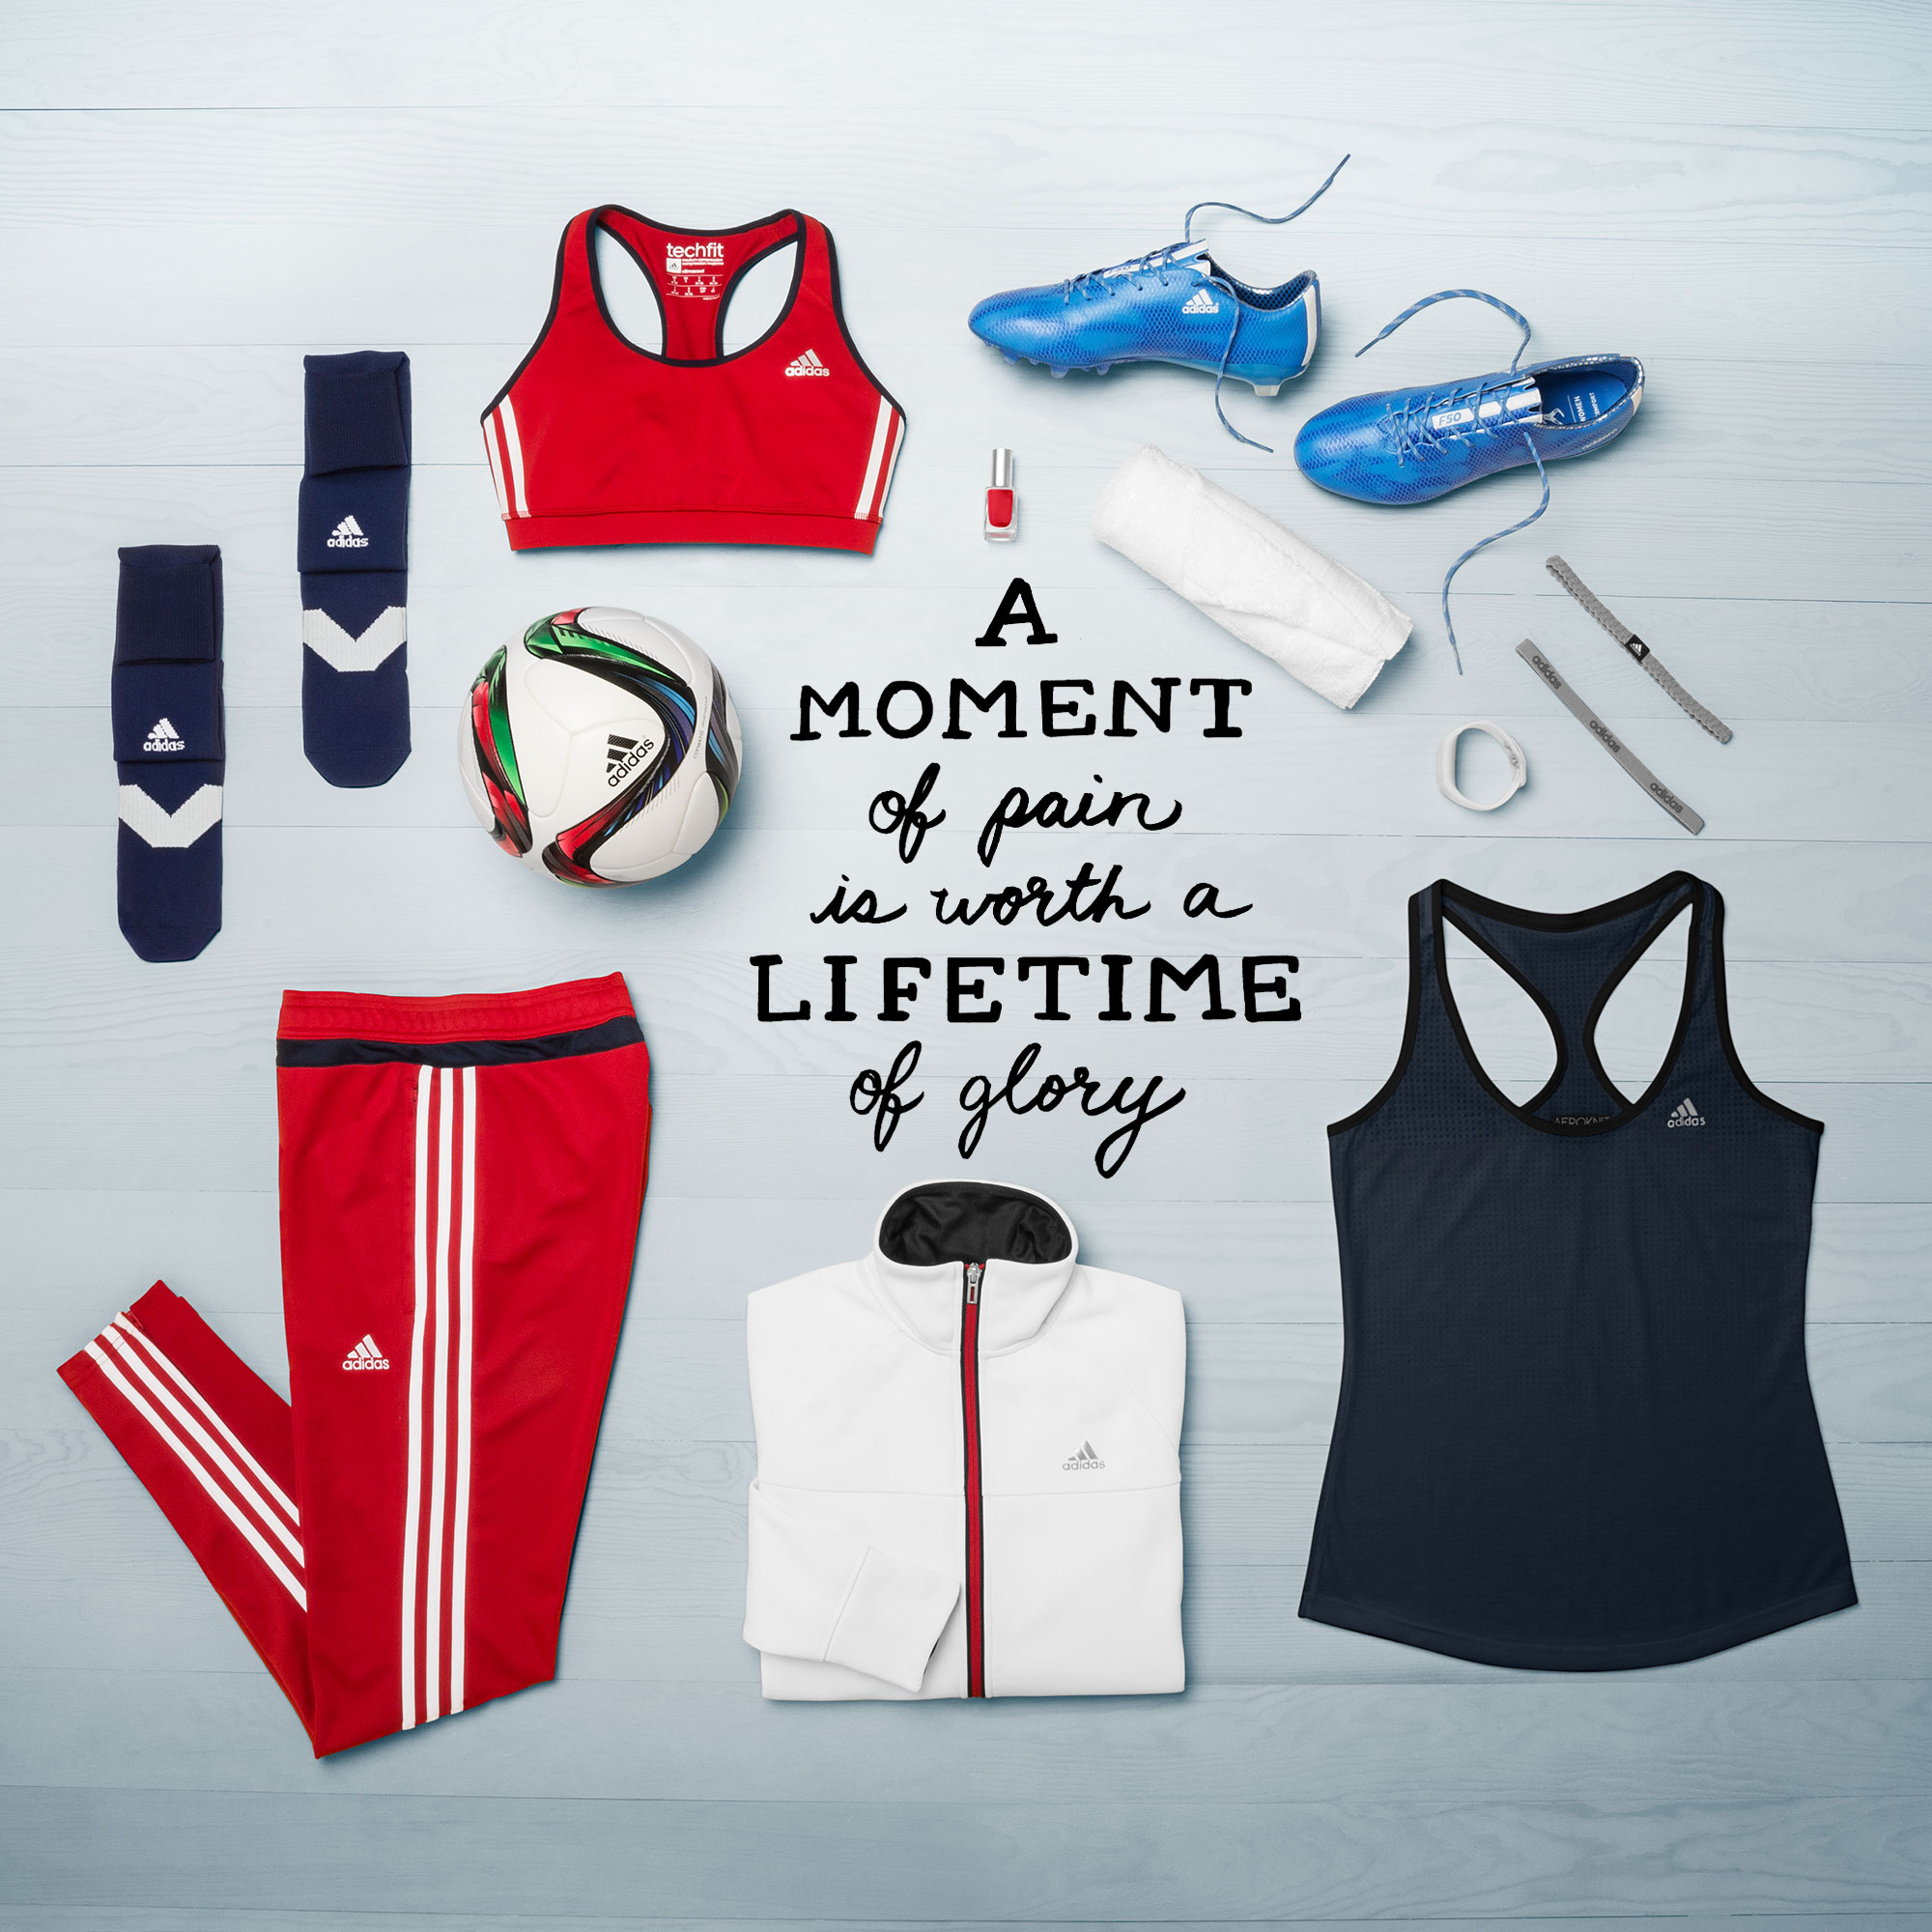 ADIDAS WORLD CUP APPAREL COLLECTION